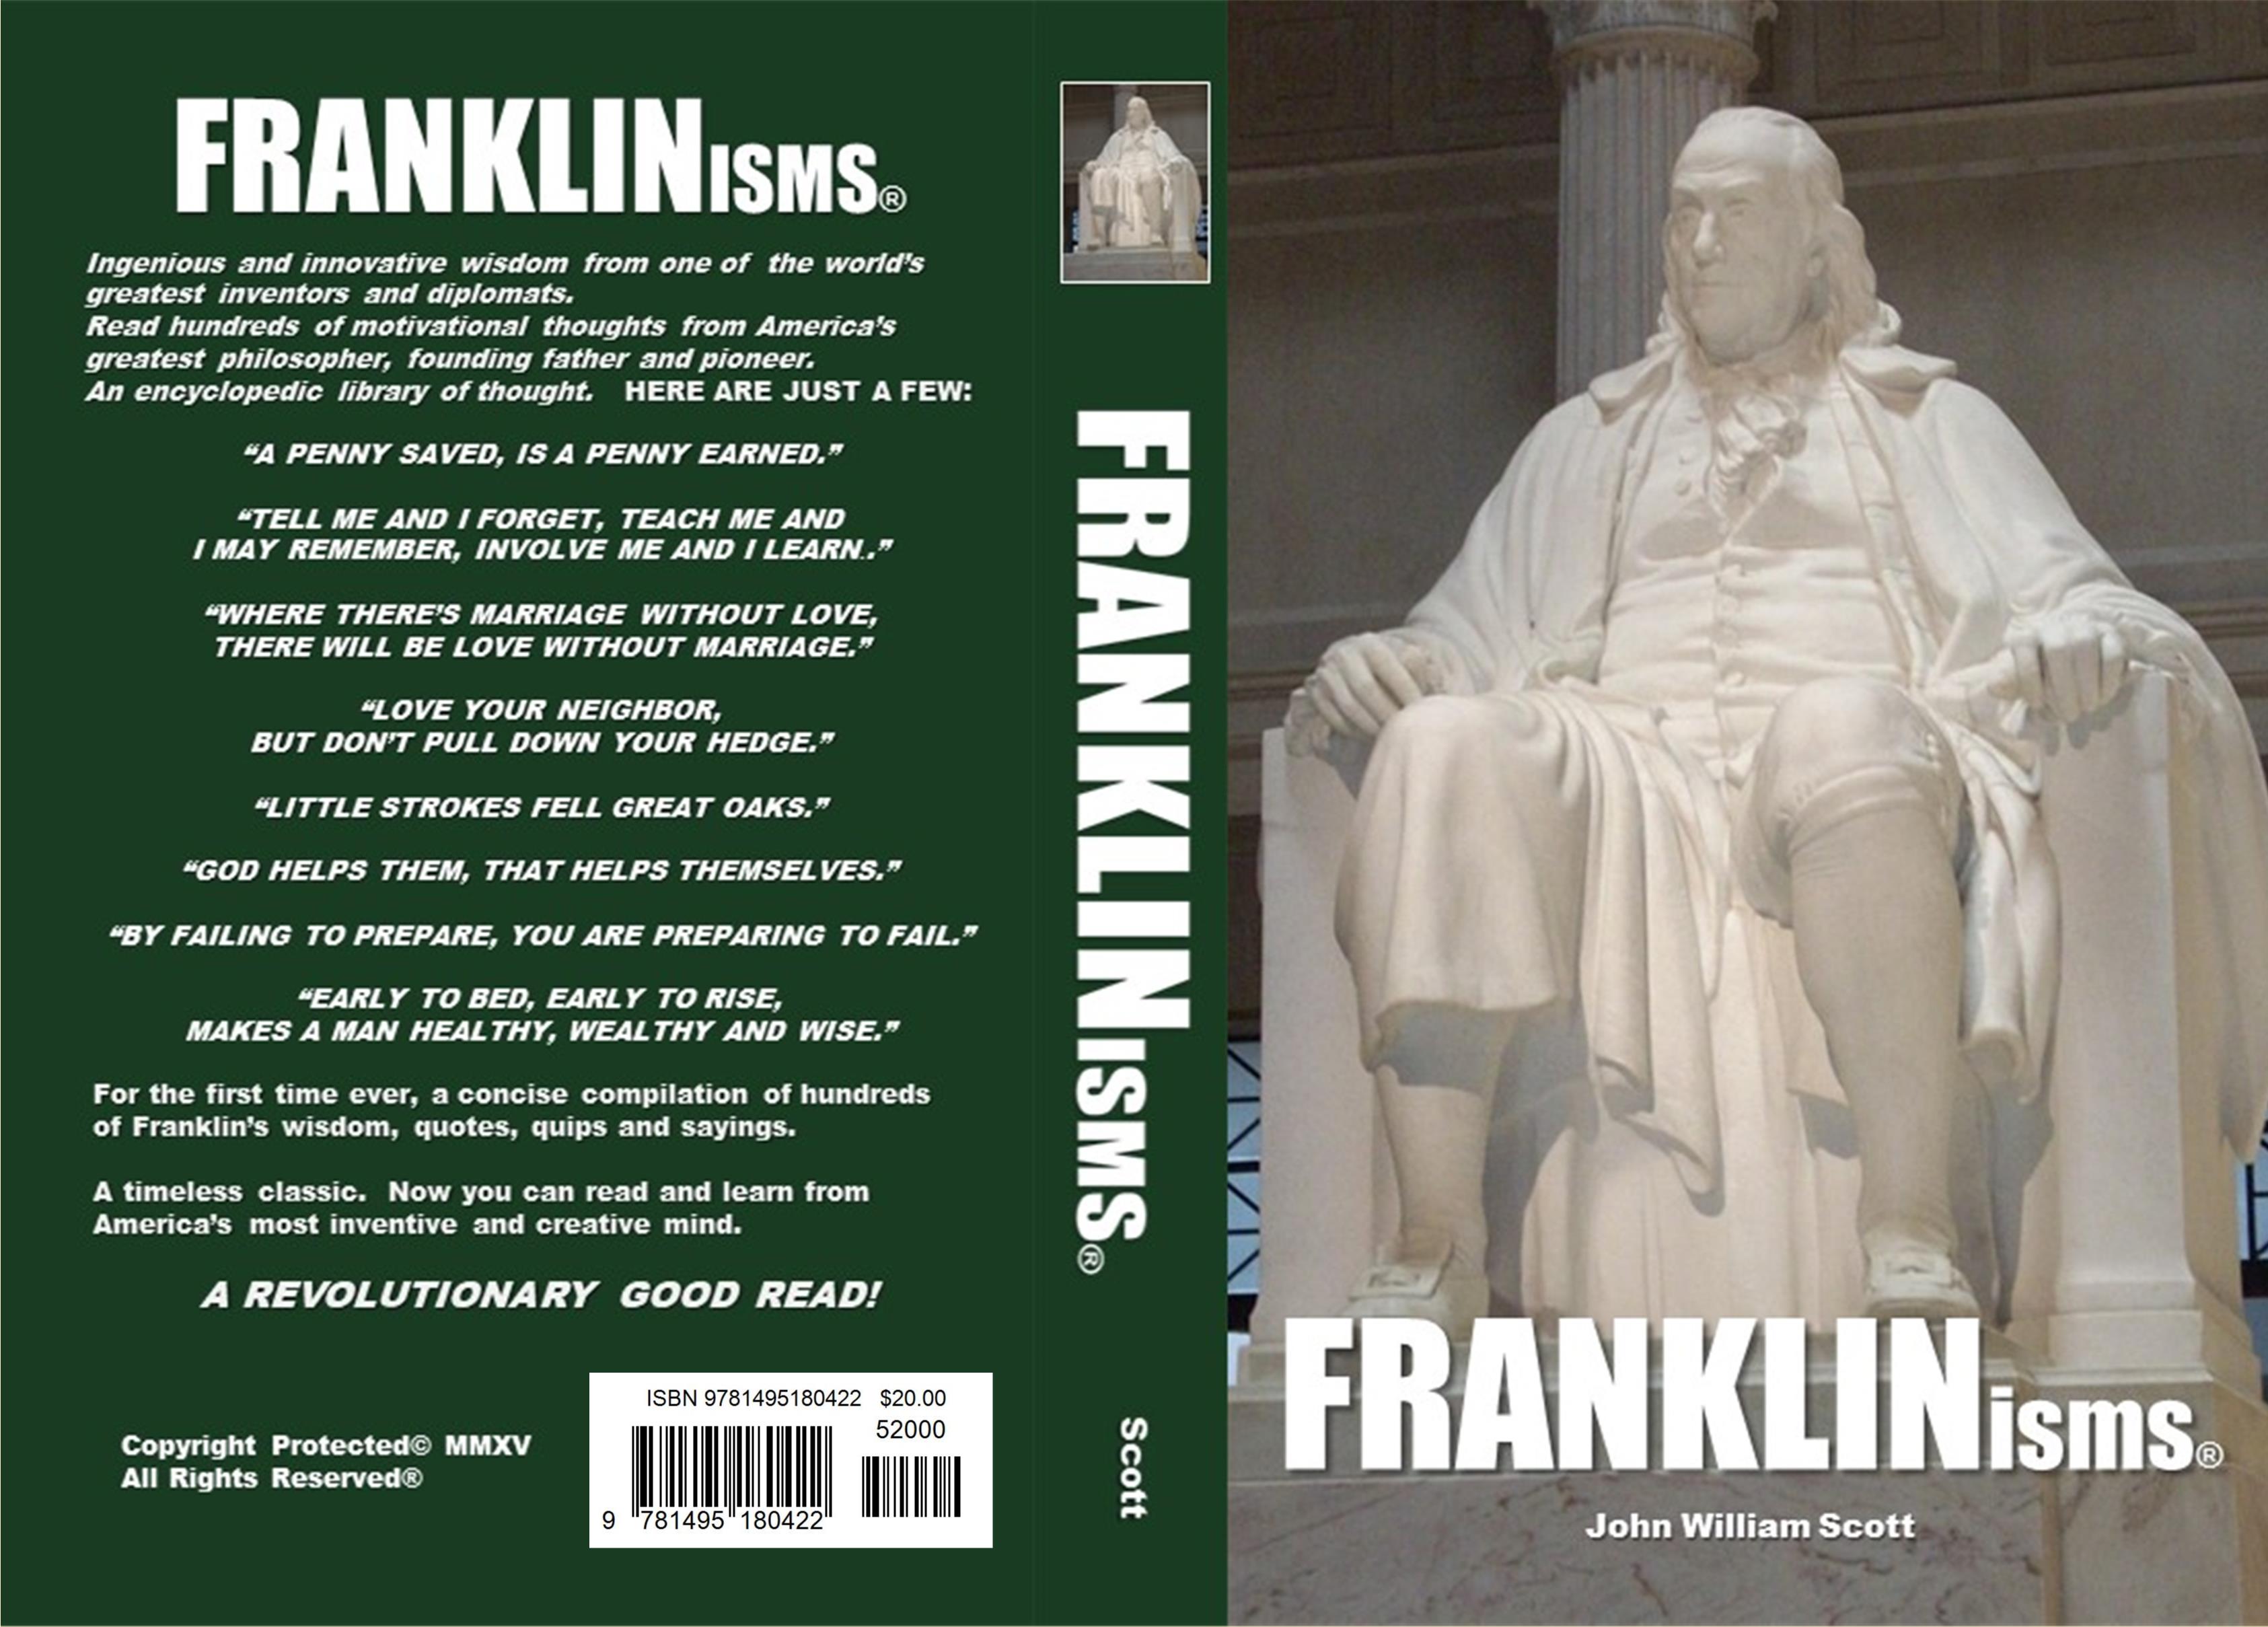 FRANKLINisms cover image